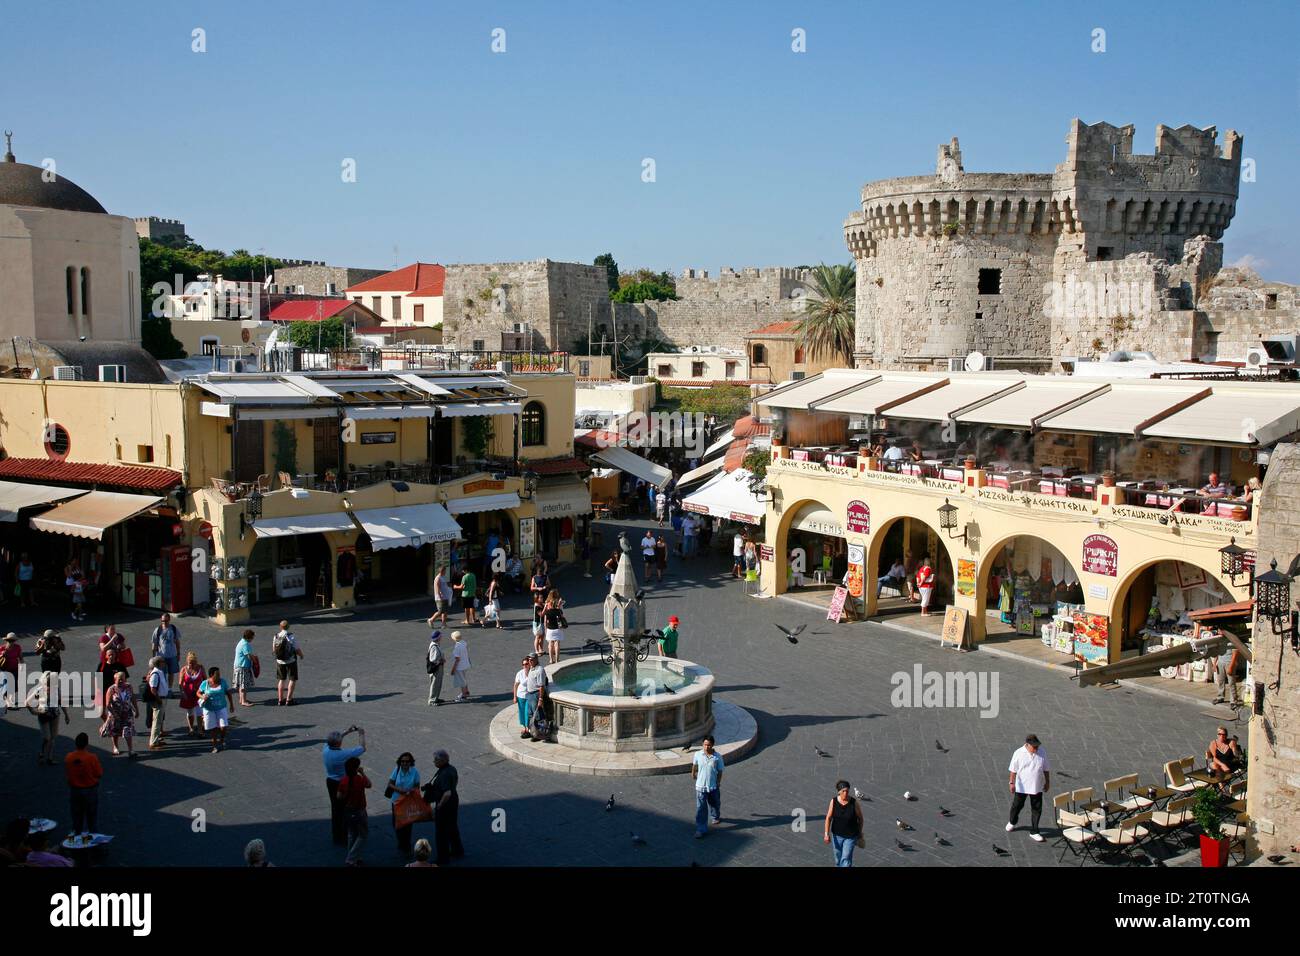 Hippocrates square and the castellania building, Greece Stock Photo